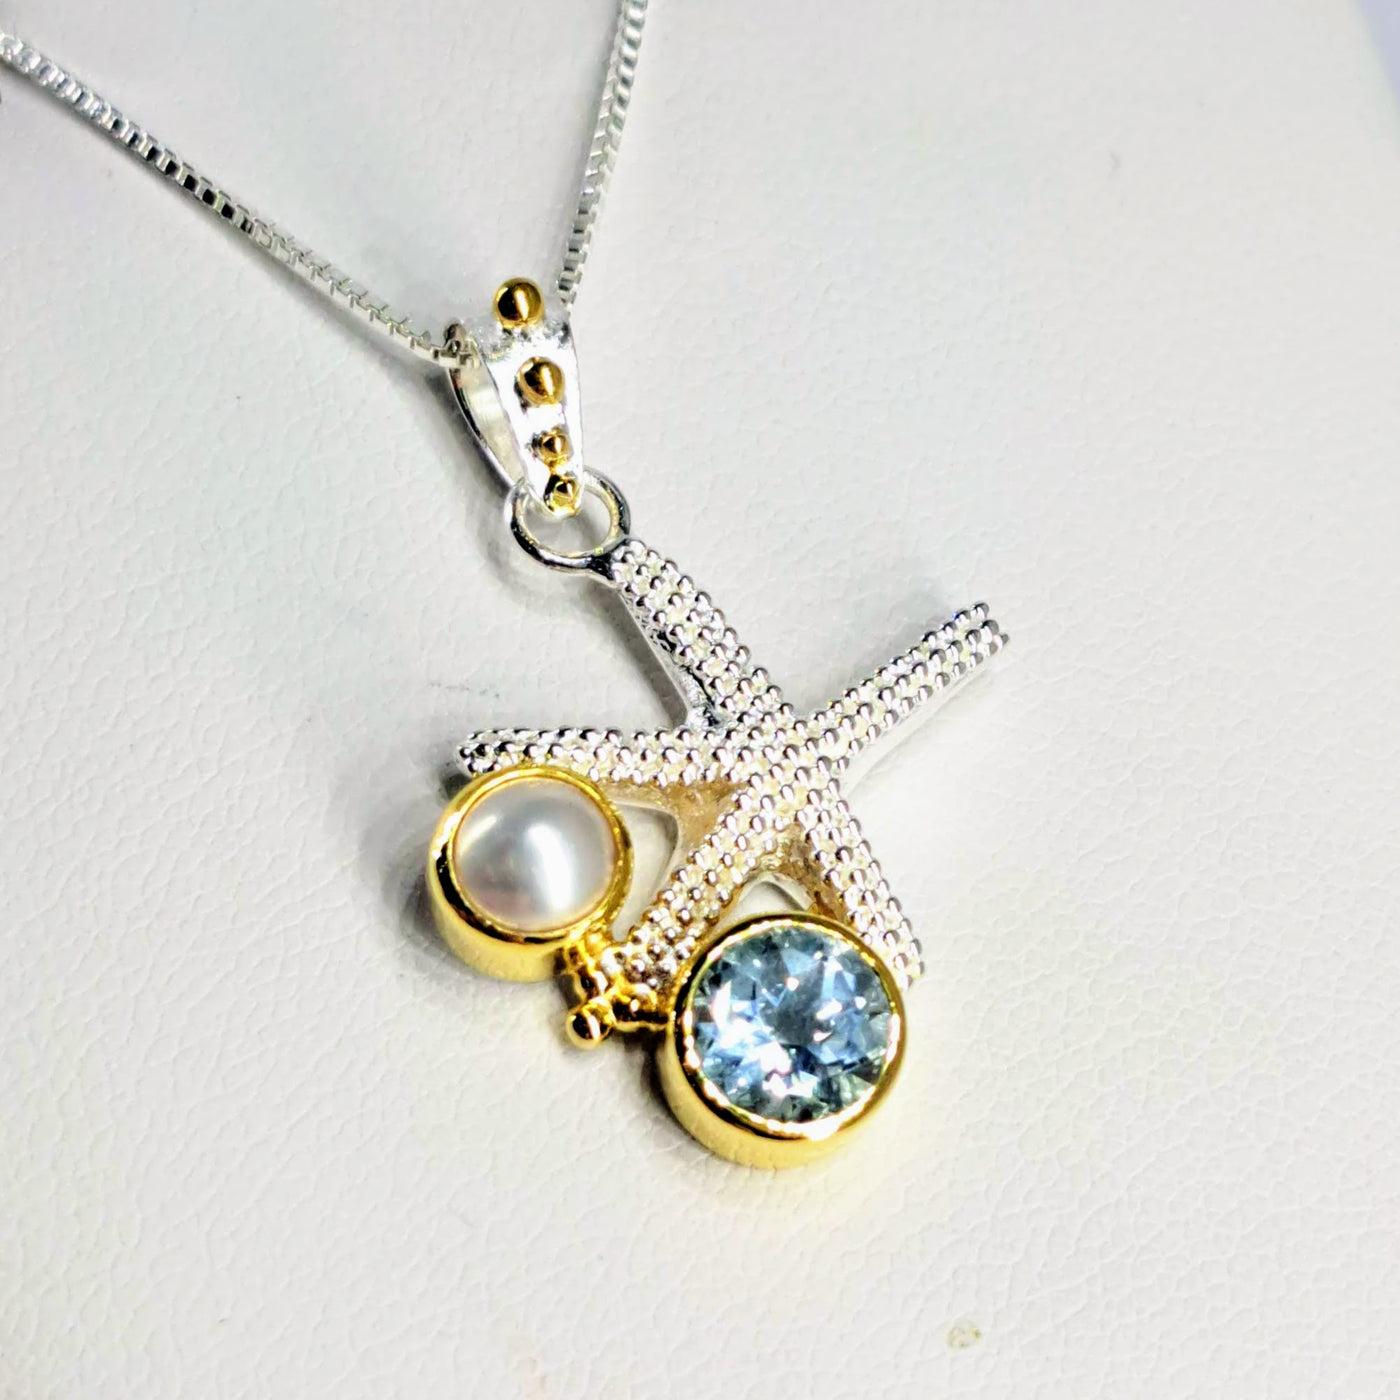 "Lucky Star" 1" Pendant Necklace - Pearl, Topaz, Sterling, 22K Gold